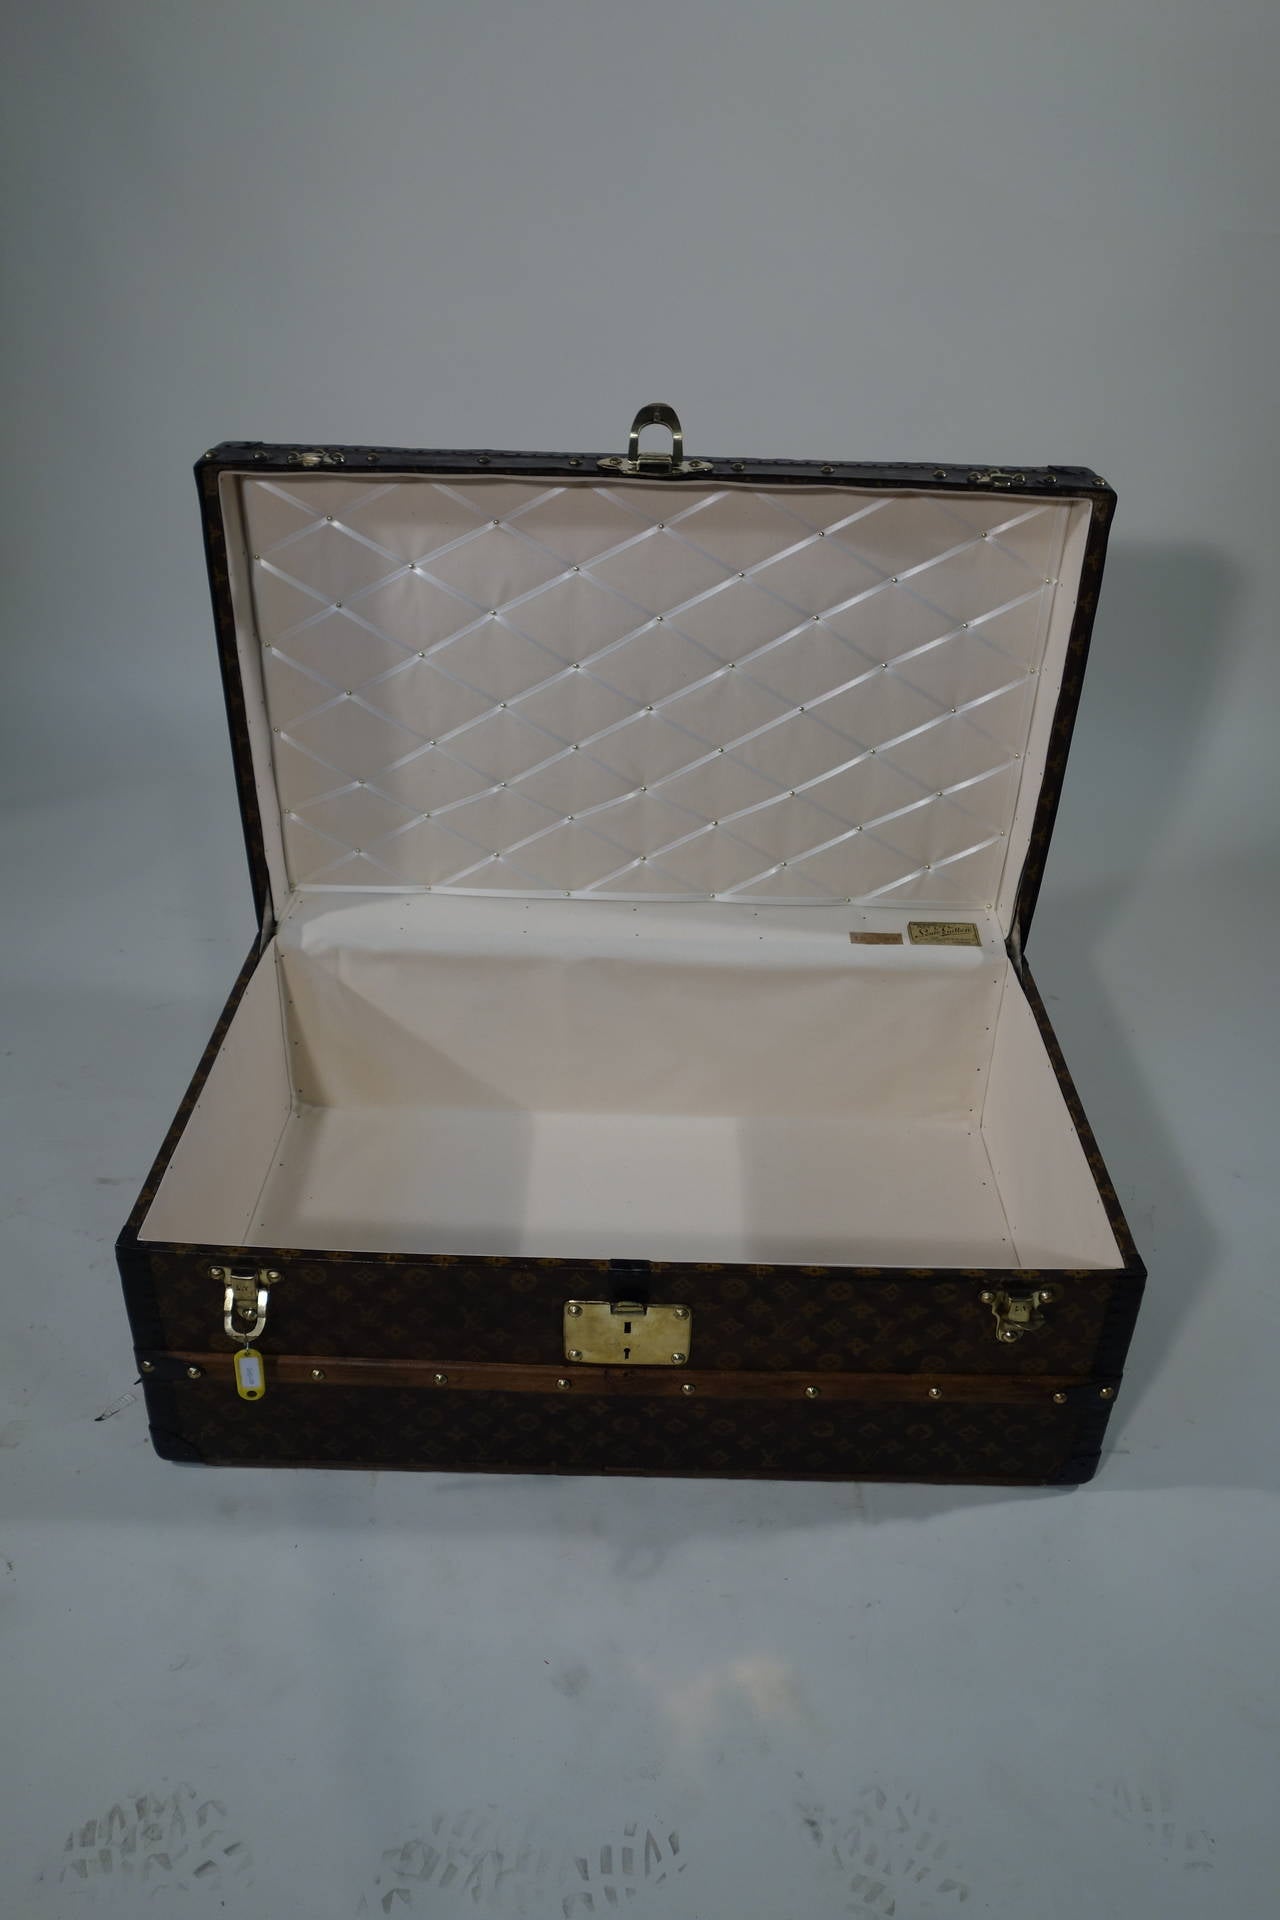 Louis Vuitton trunk is stenciled monogram canvas and metal border
FREE  SHIPPING  

Original trunk, good conditions, outside 
New inside  redonne 
Brass lock, inside empty, original label.

Period: 1909-1914.

All the trunks we sell have